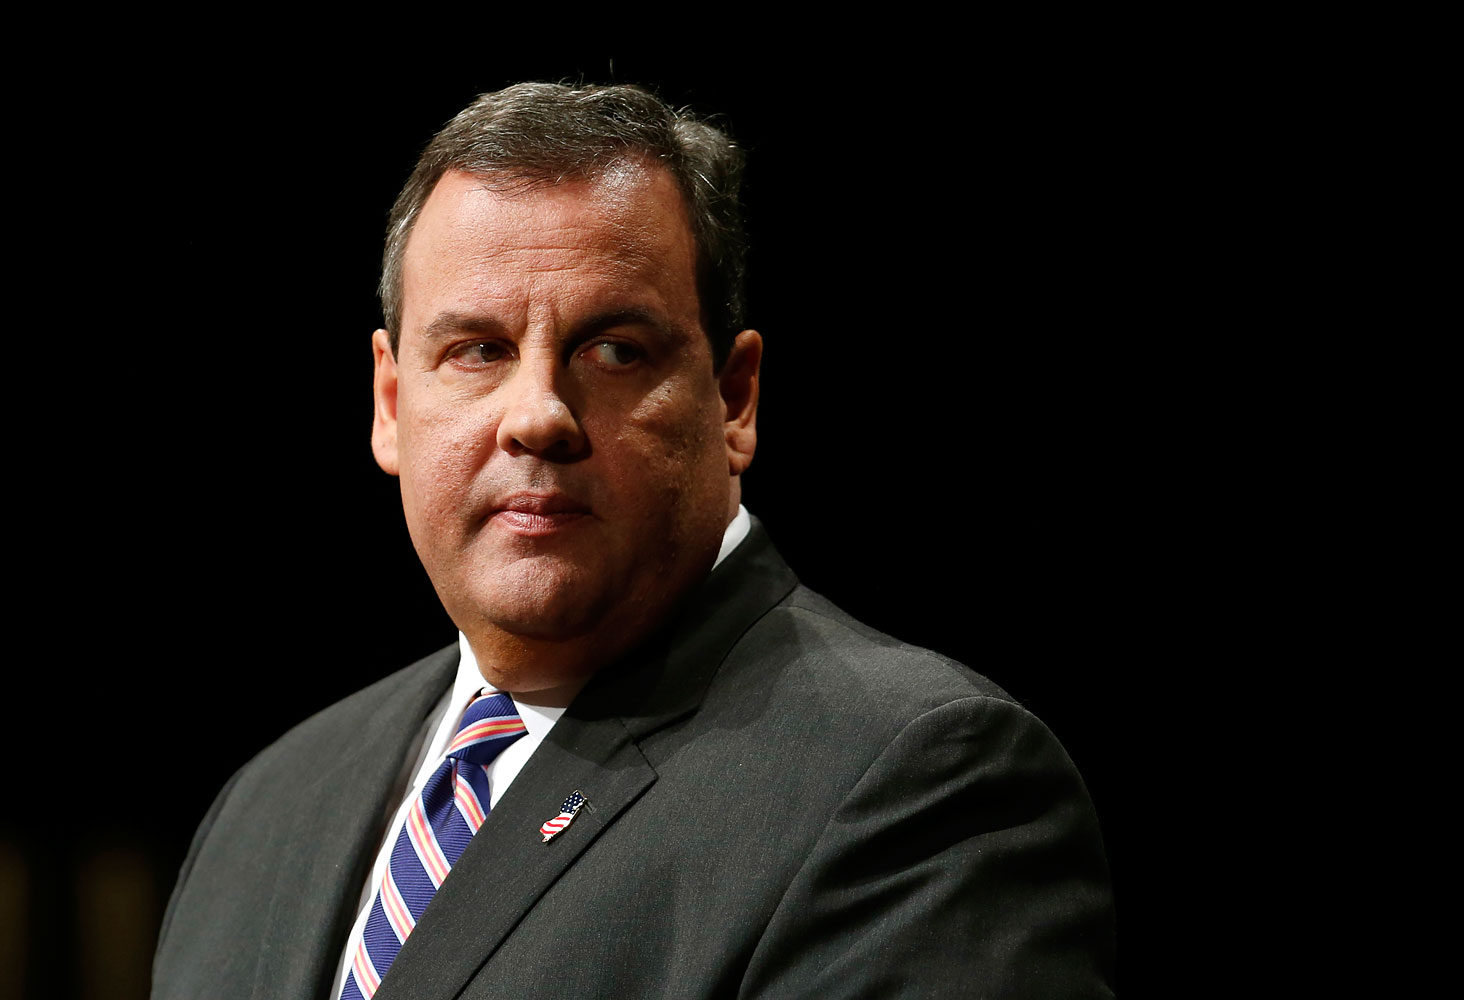 New Jersey Governor Chris Christie delivers an address after being sworn in for his second term as governor on Jan. 21, 2014. (Lucas Jackson / Reuters)